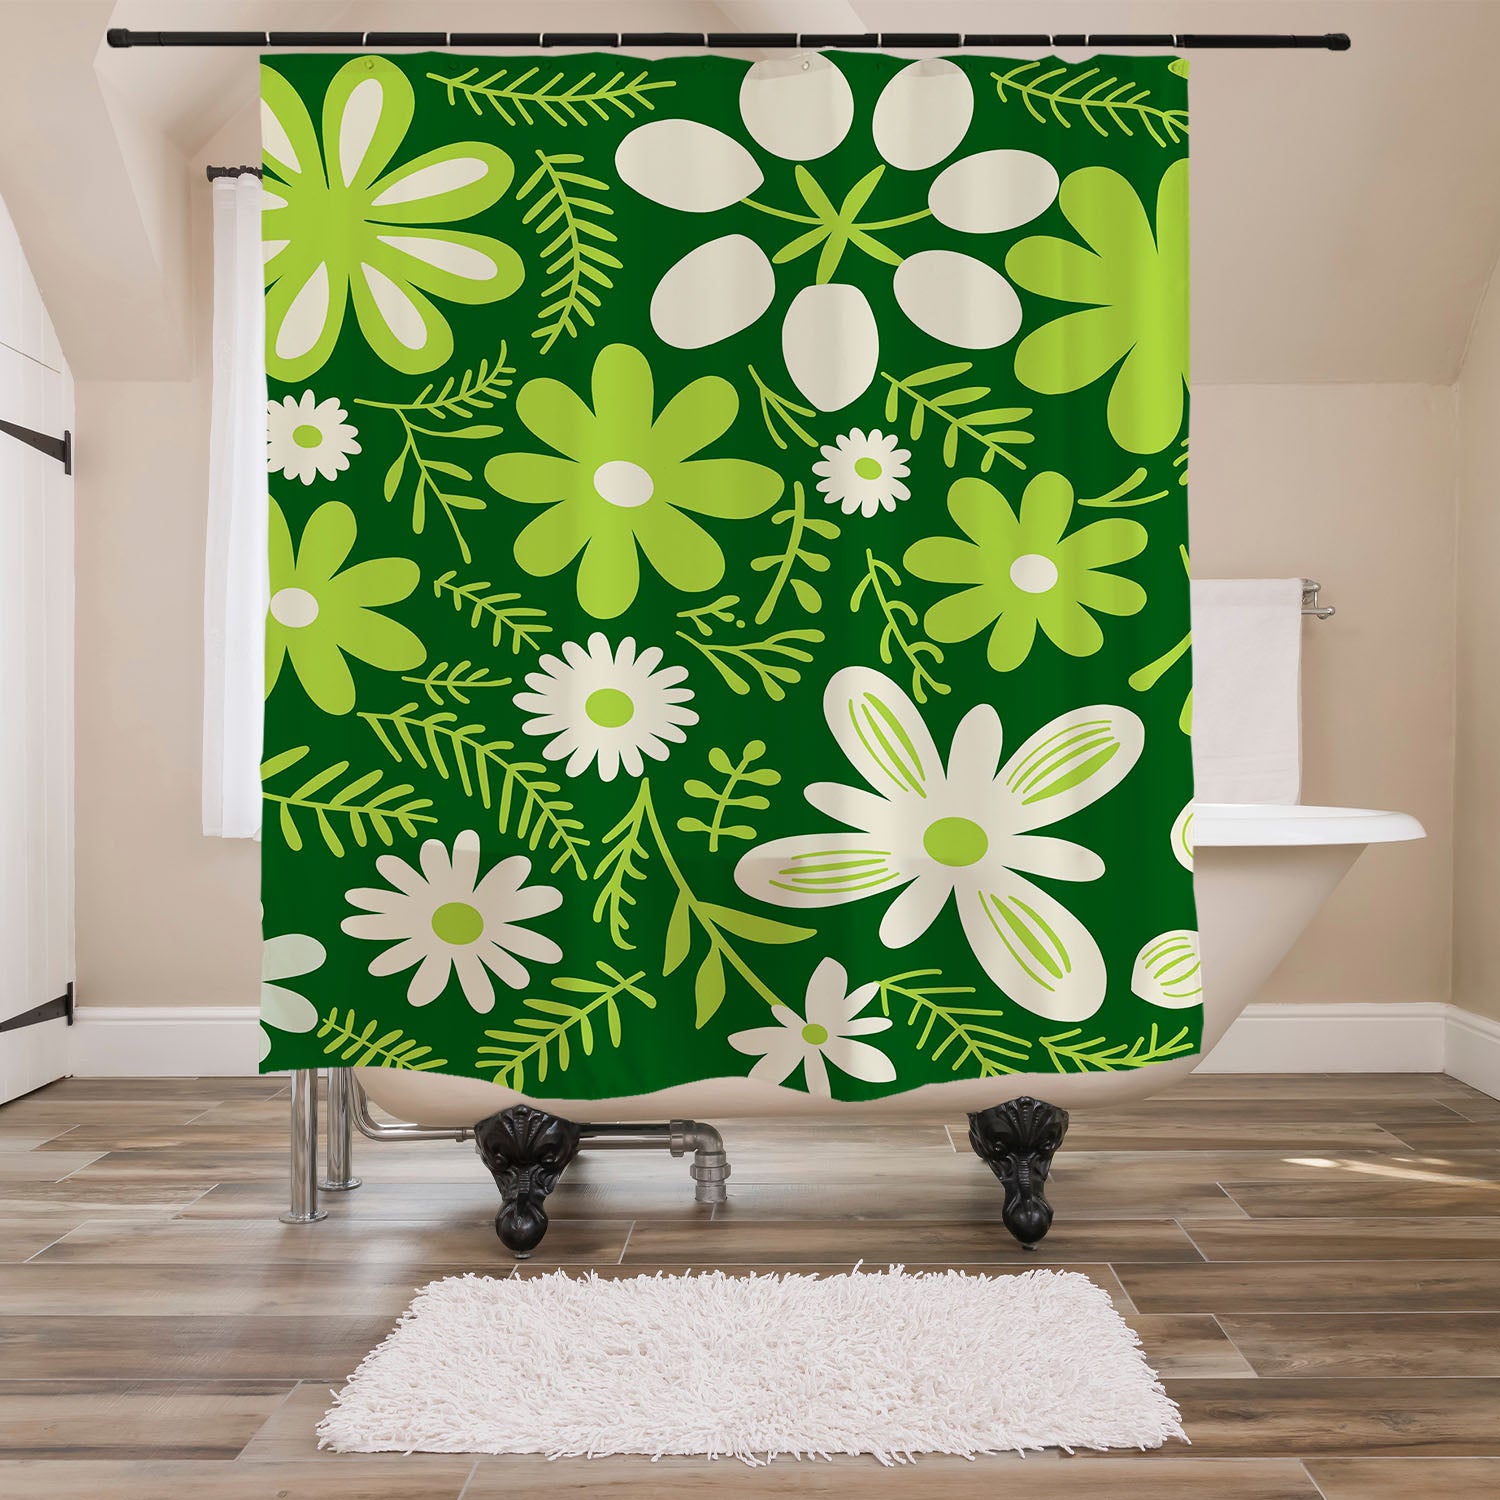 Feblilac Green Flowers Shower Curtain with Hooks